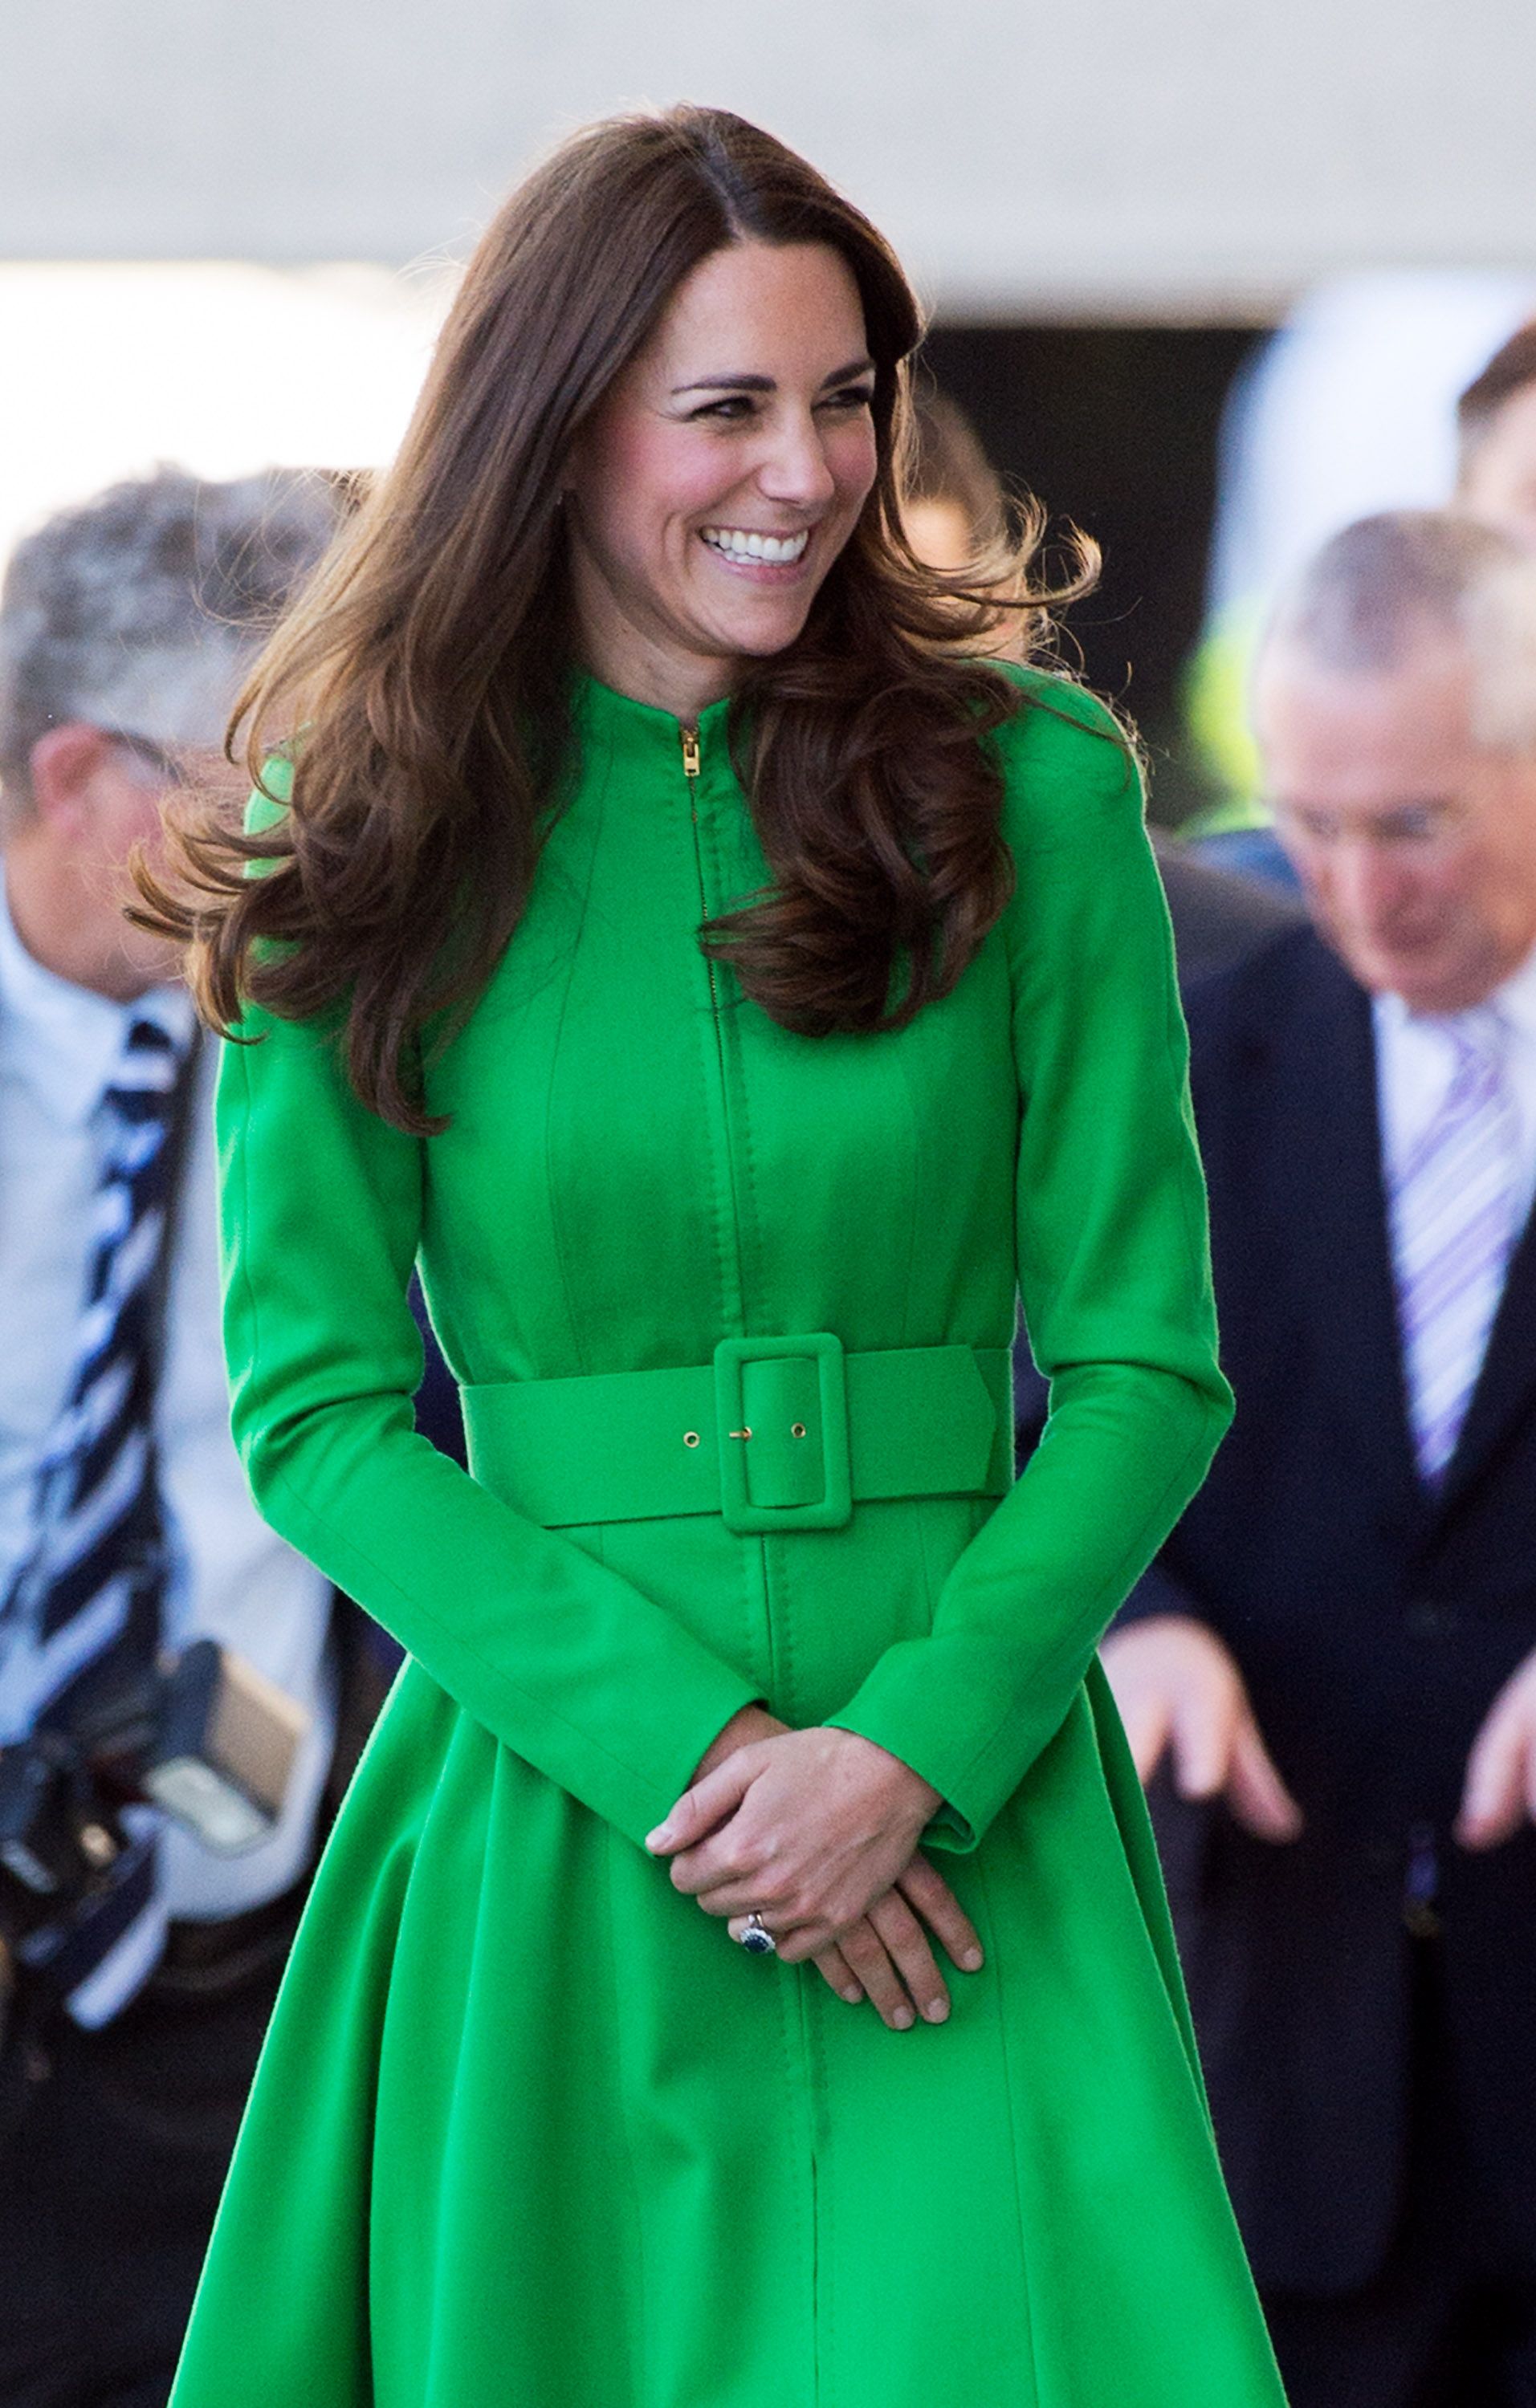 Kate Middleton the Duchess of Cambridge visits the National Portrait Gallery on April 24, 2014 in Canberra, Australia. | Photo: Getty Images.